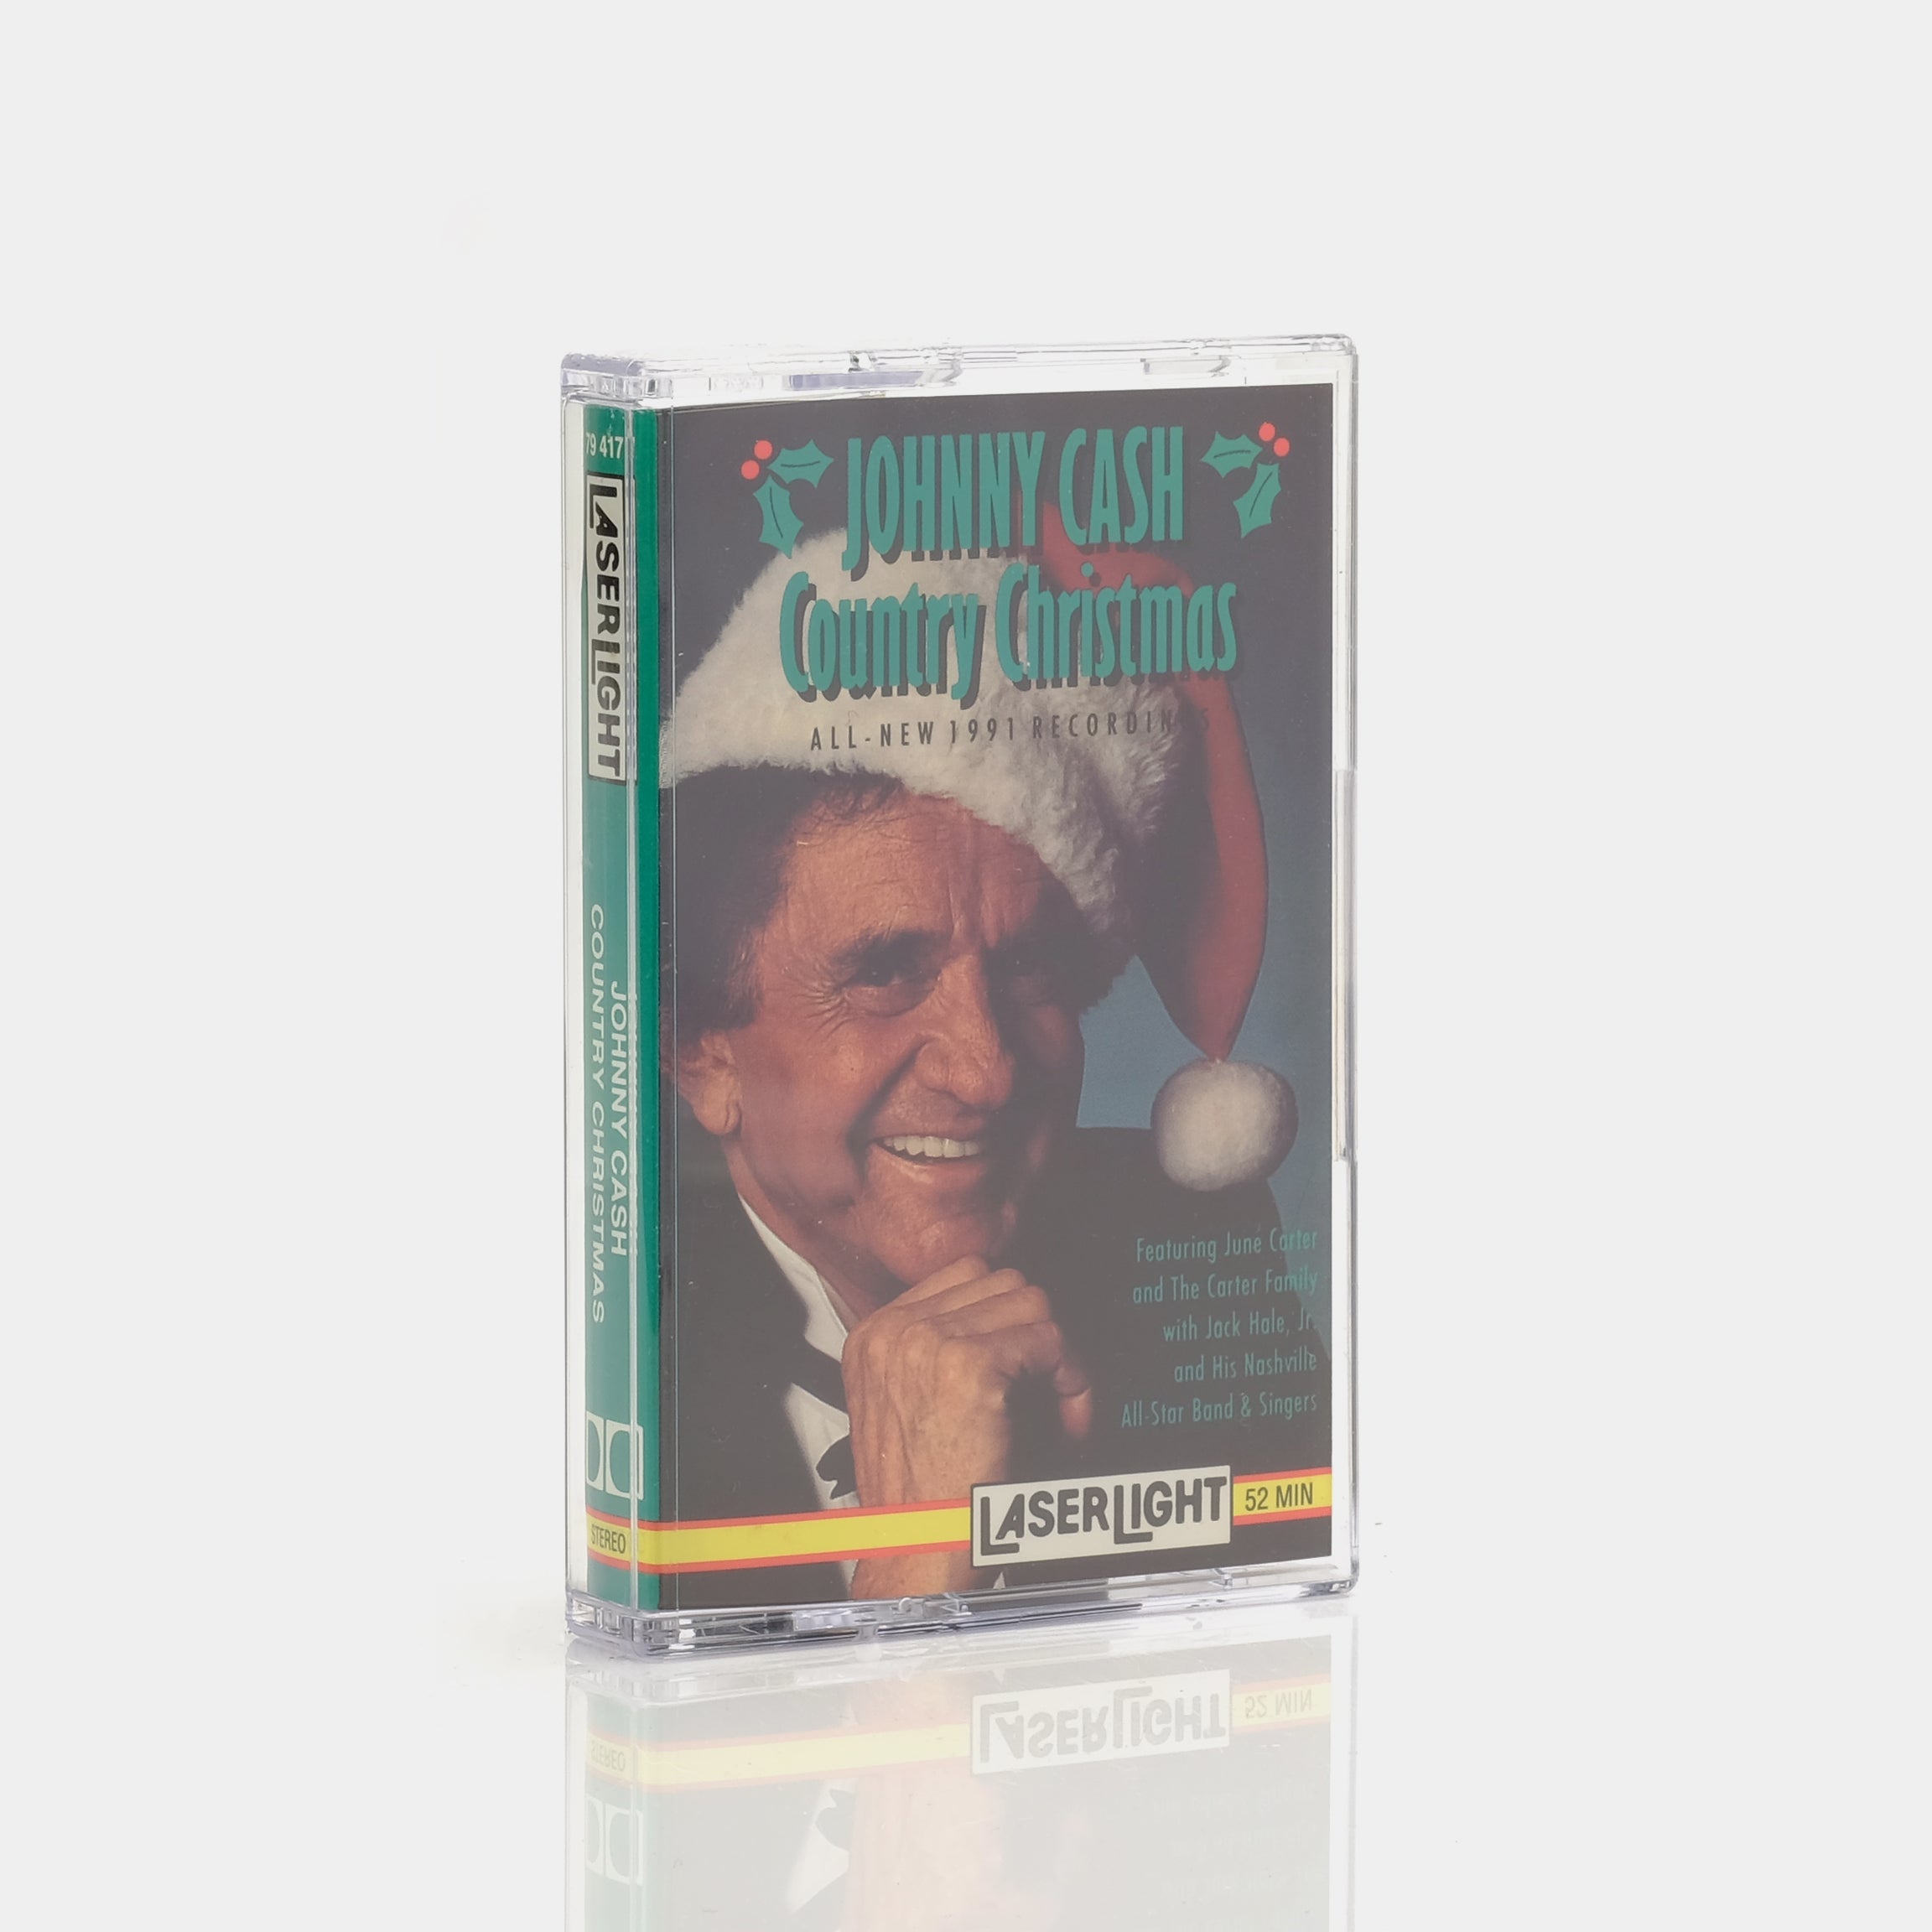 Johnny Cash - Country Christmas Cassette Tape